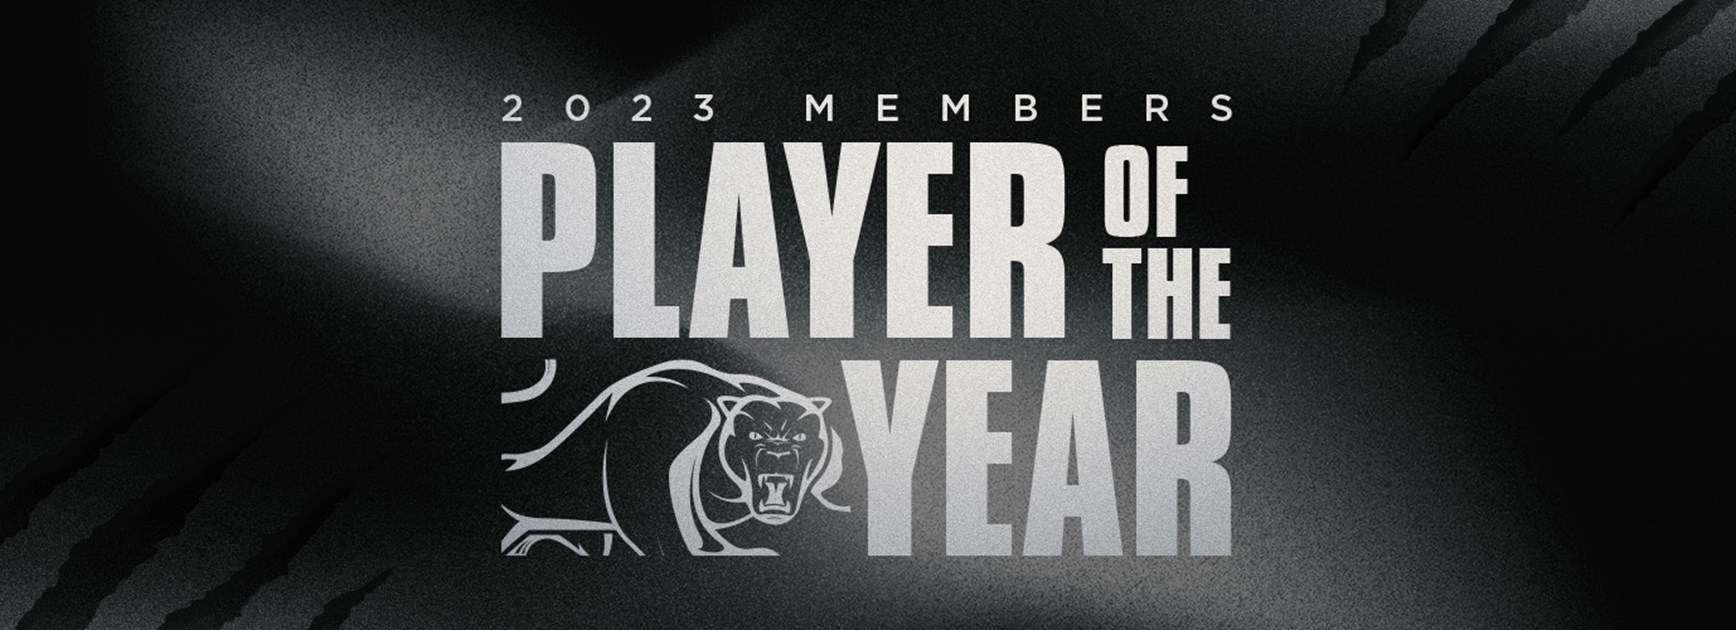 Vote for the 2023 Members Player of the Year